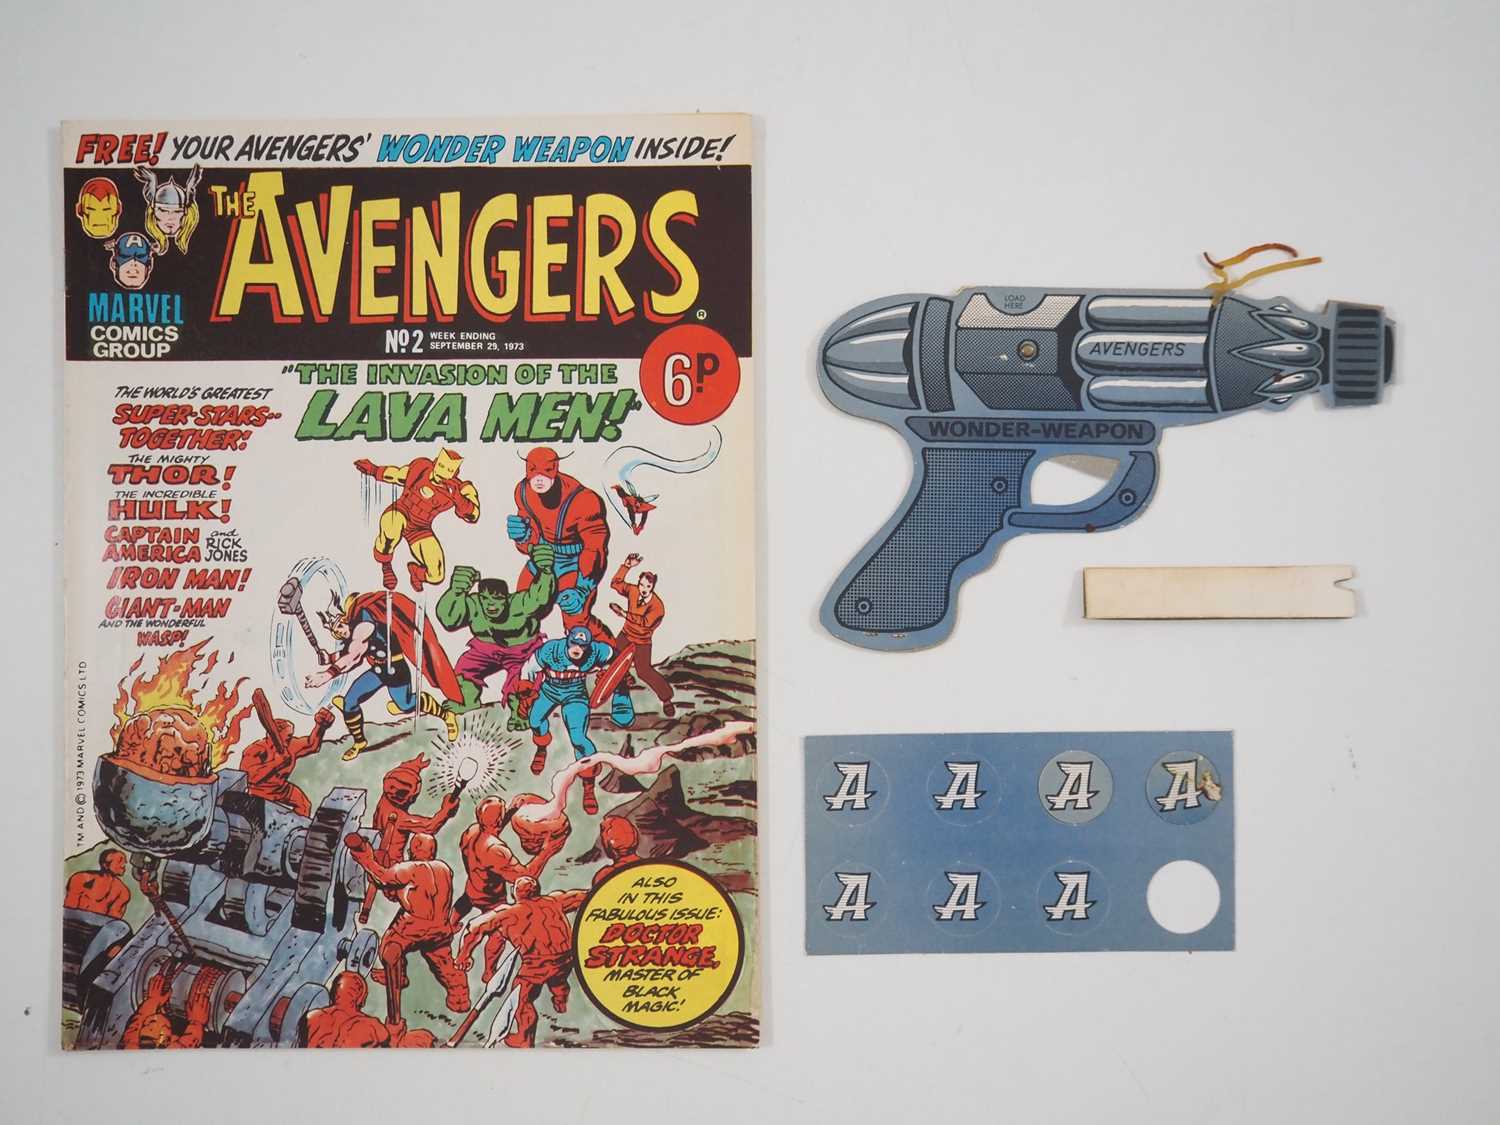 AVENGERS #2 (1973 - MARVEL UK) - Rare opportunity to pick up the second issue with the WONDER WEAPON